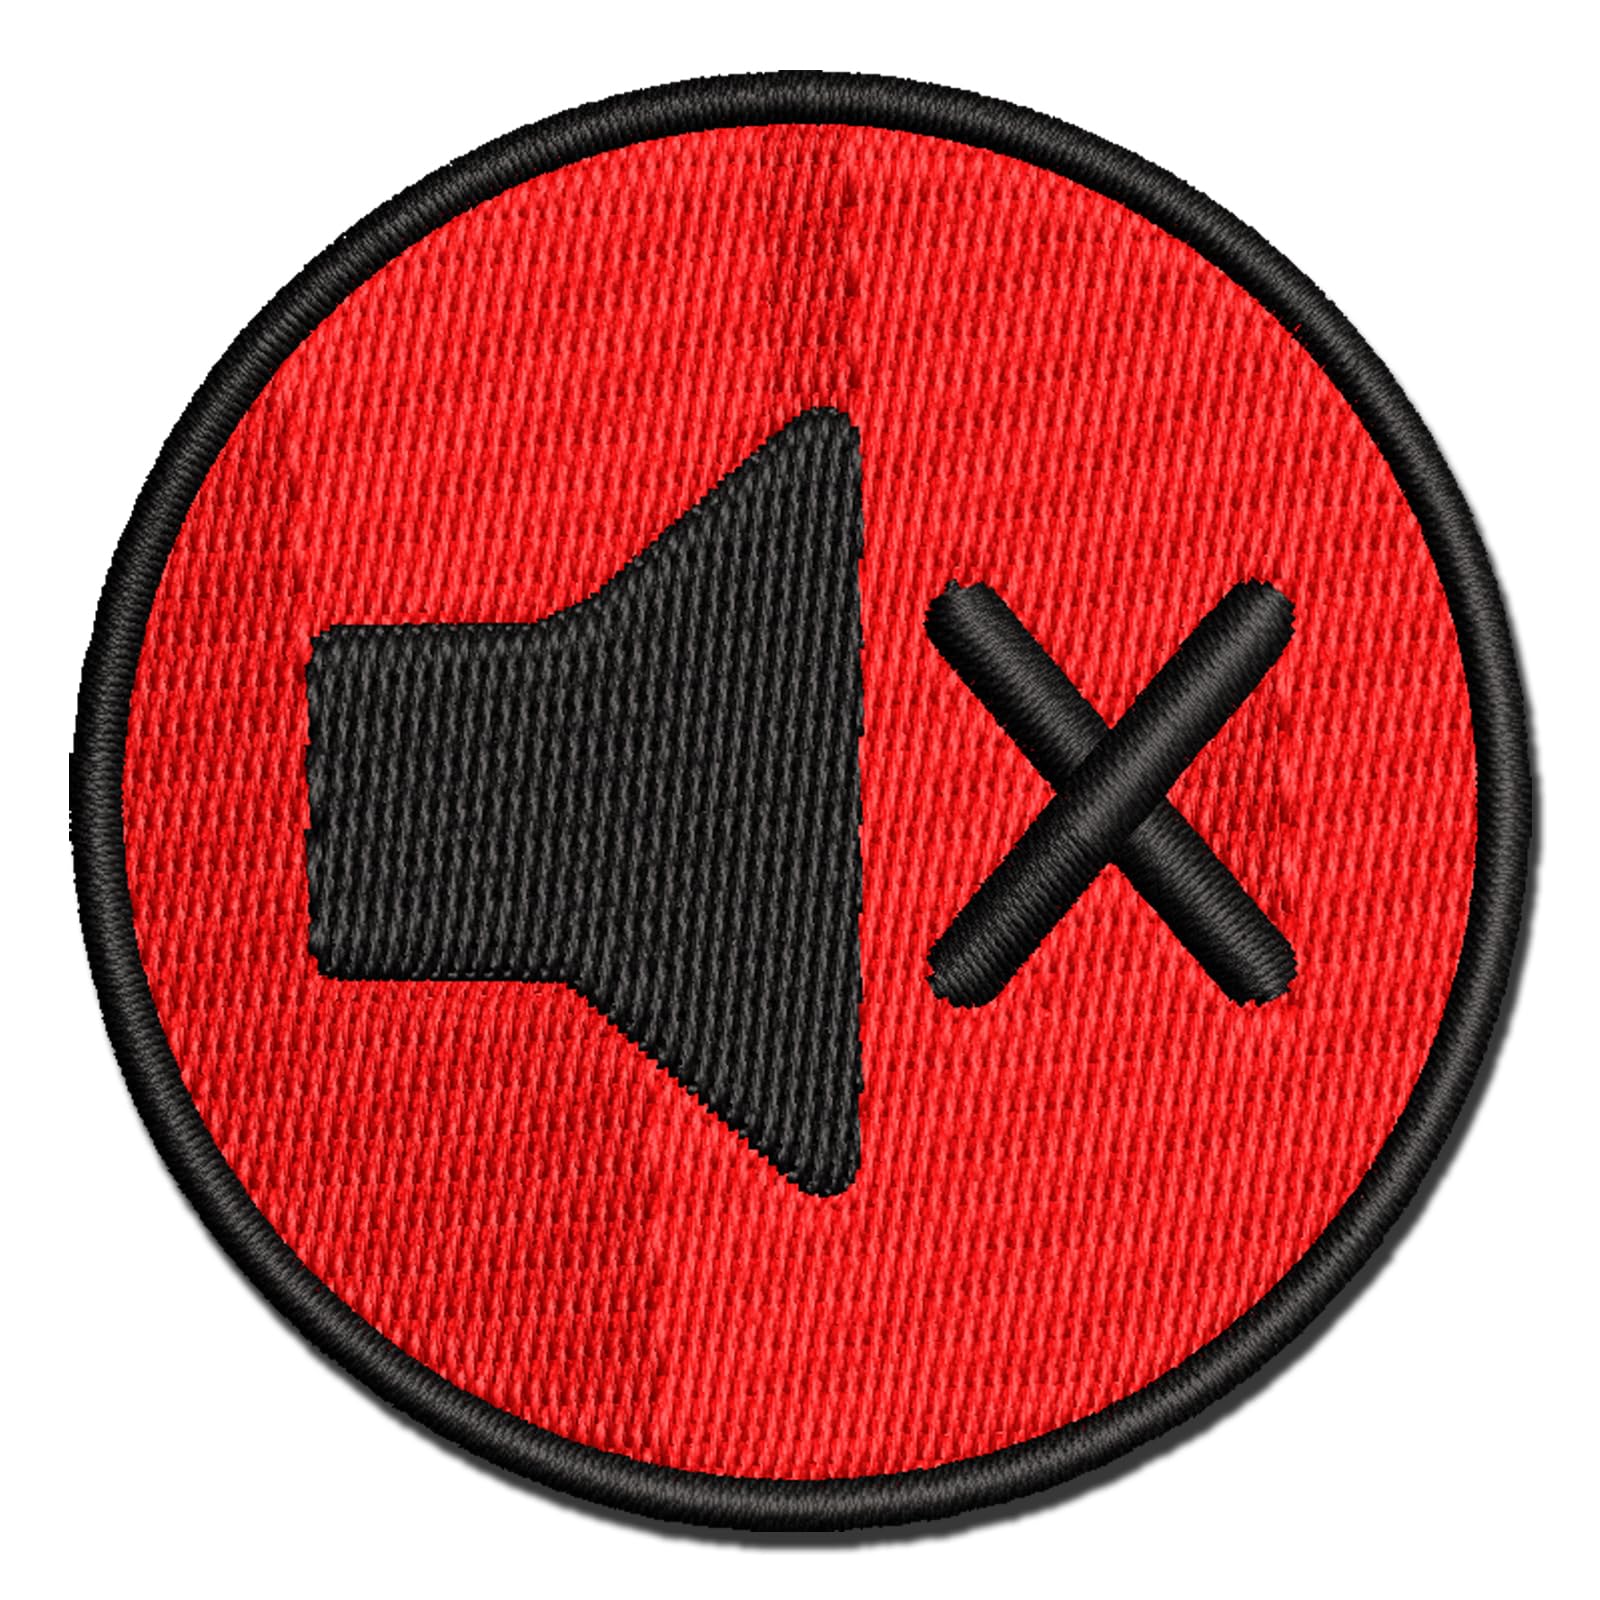 Speaker with a red X symbol